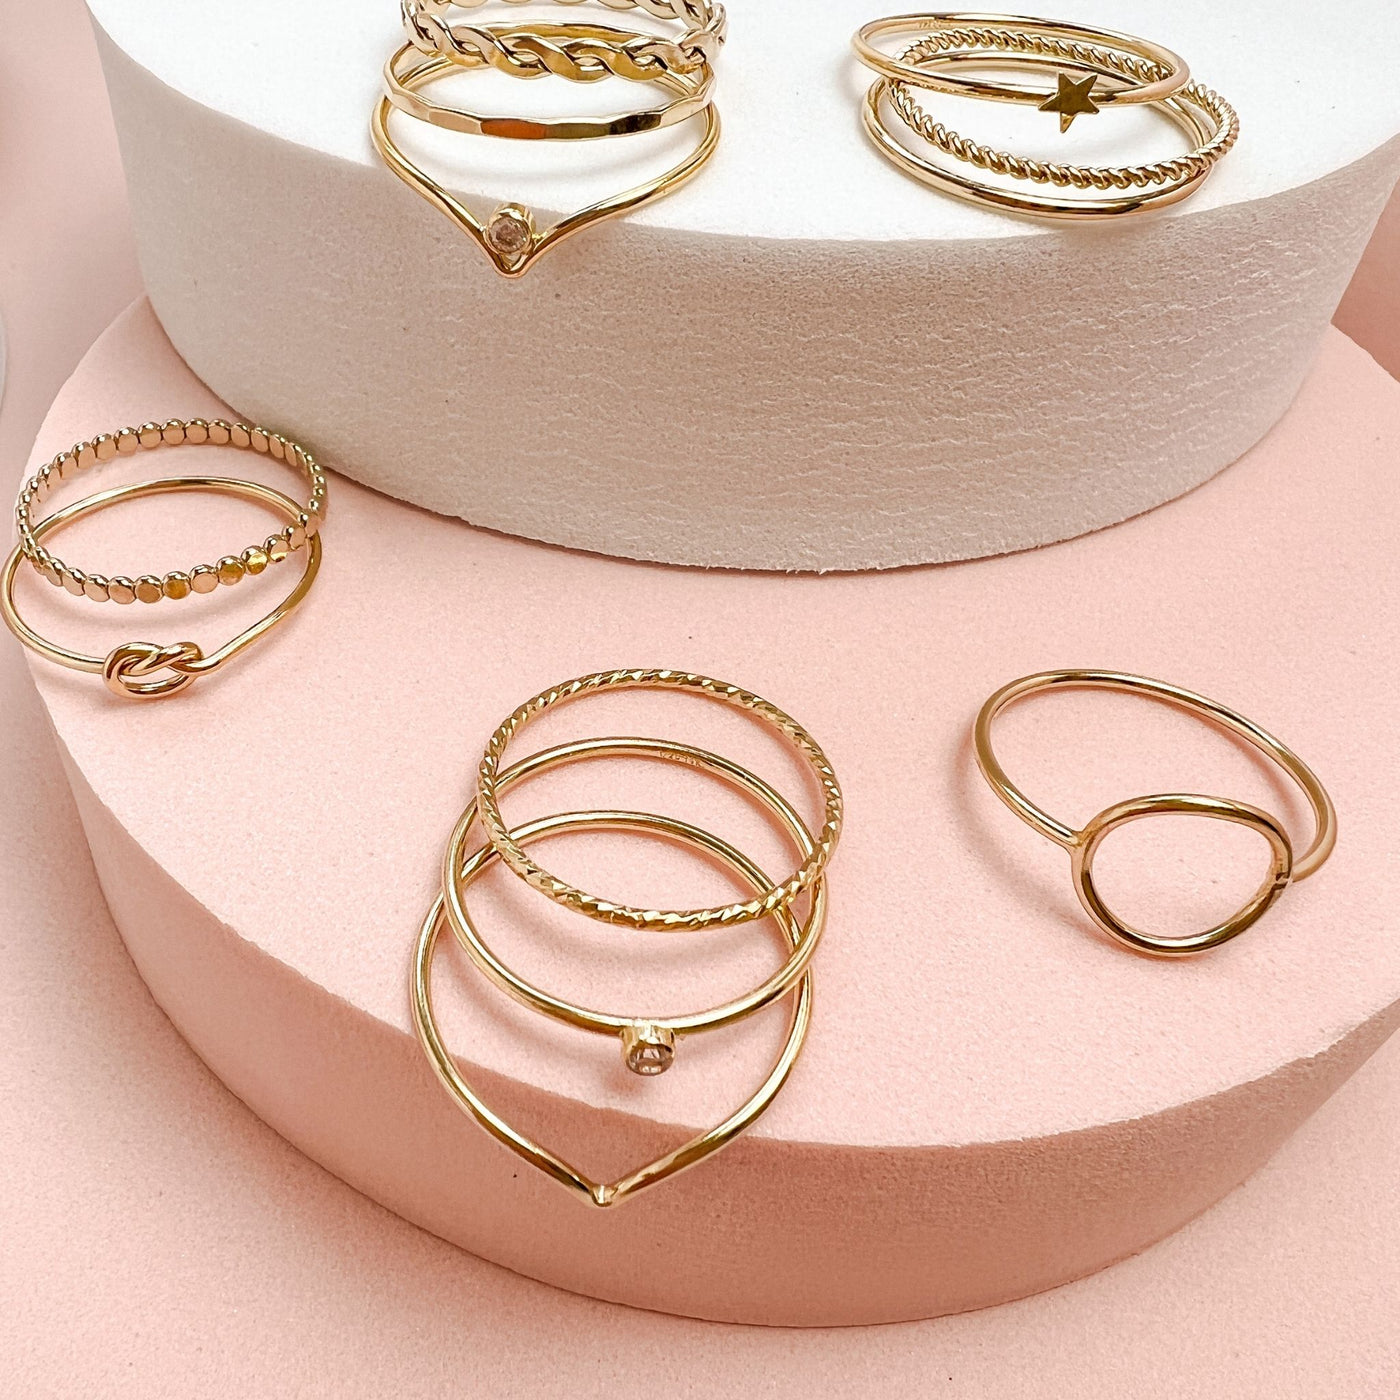 Assortment of differing styles of minimalist and dainty women’s stacking rings displayed on pink and white coloured round displays